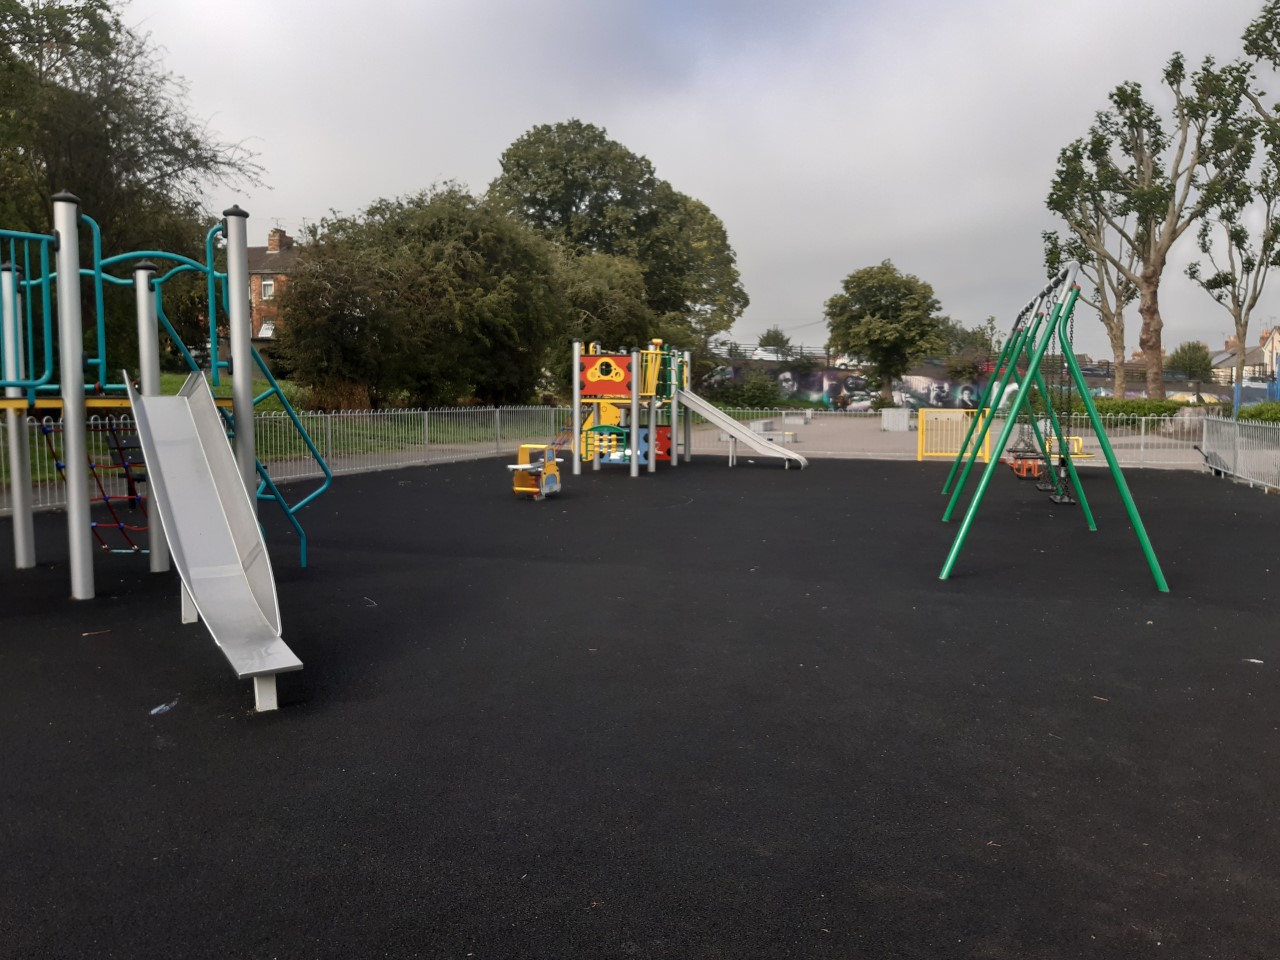 CHILDREN’S PLAY AREA REOPENS AFTER £60k MAKEOVER